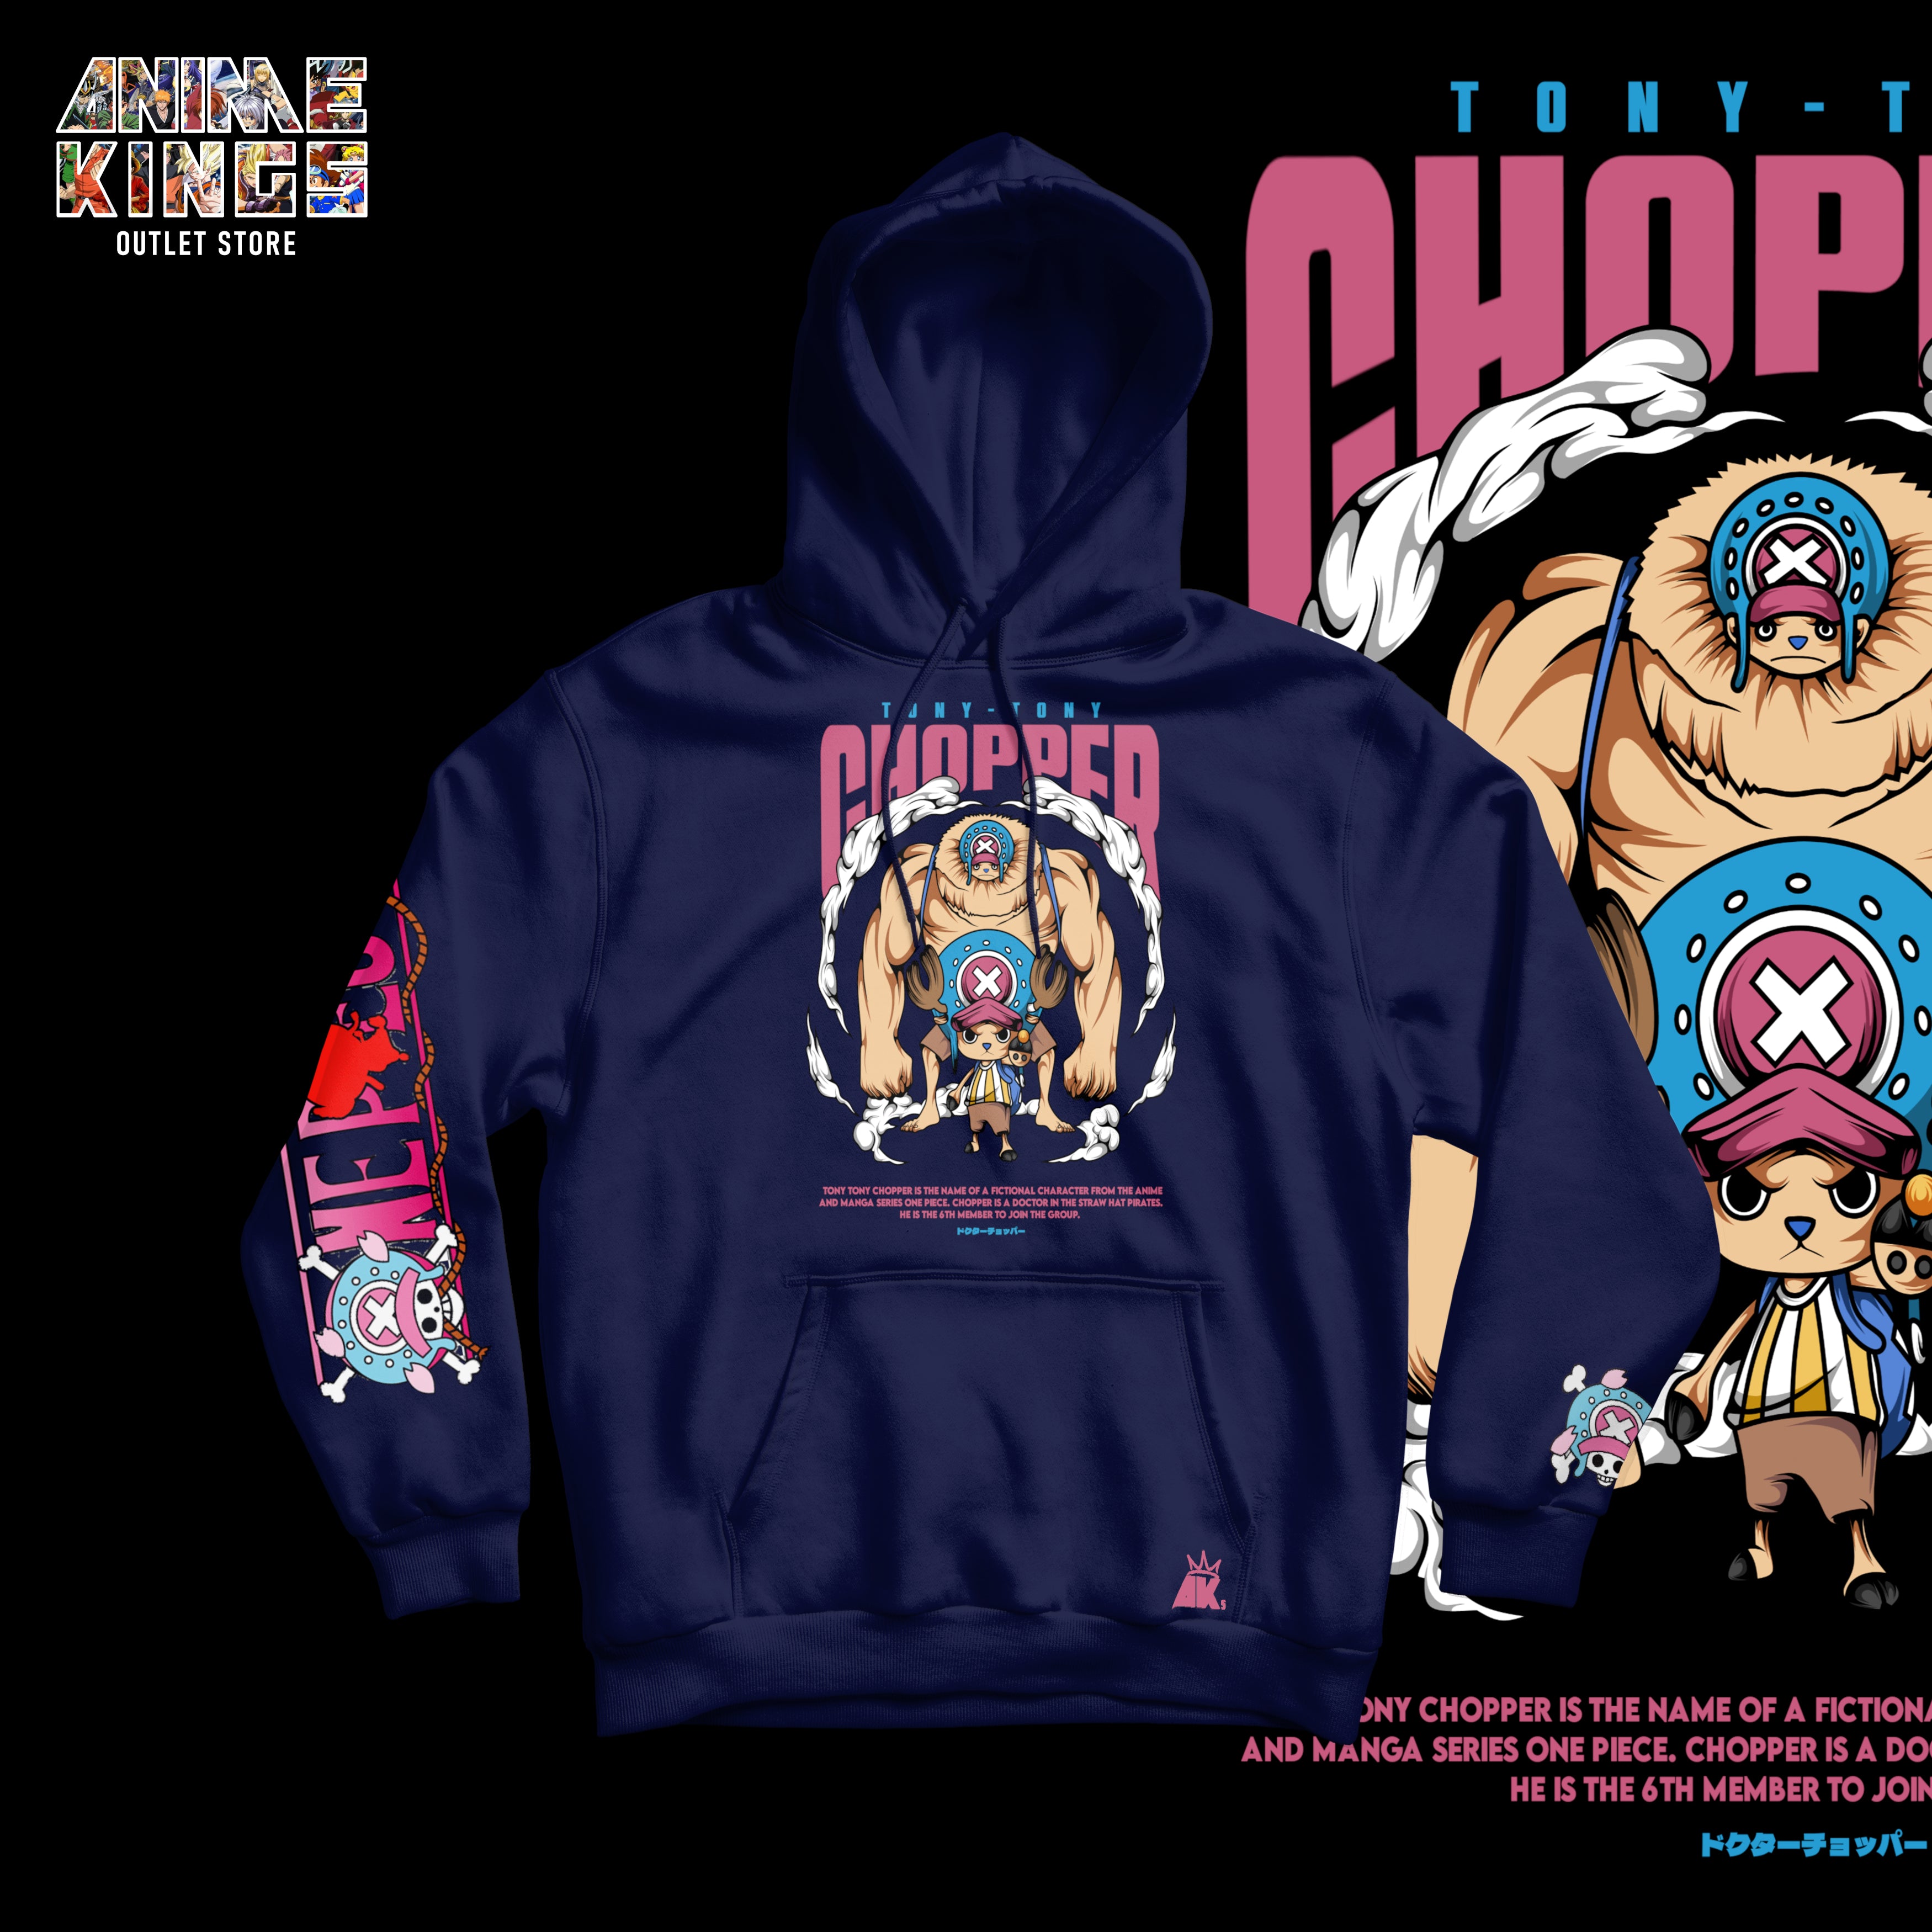 One Piece – My Store Anime kings Outlet